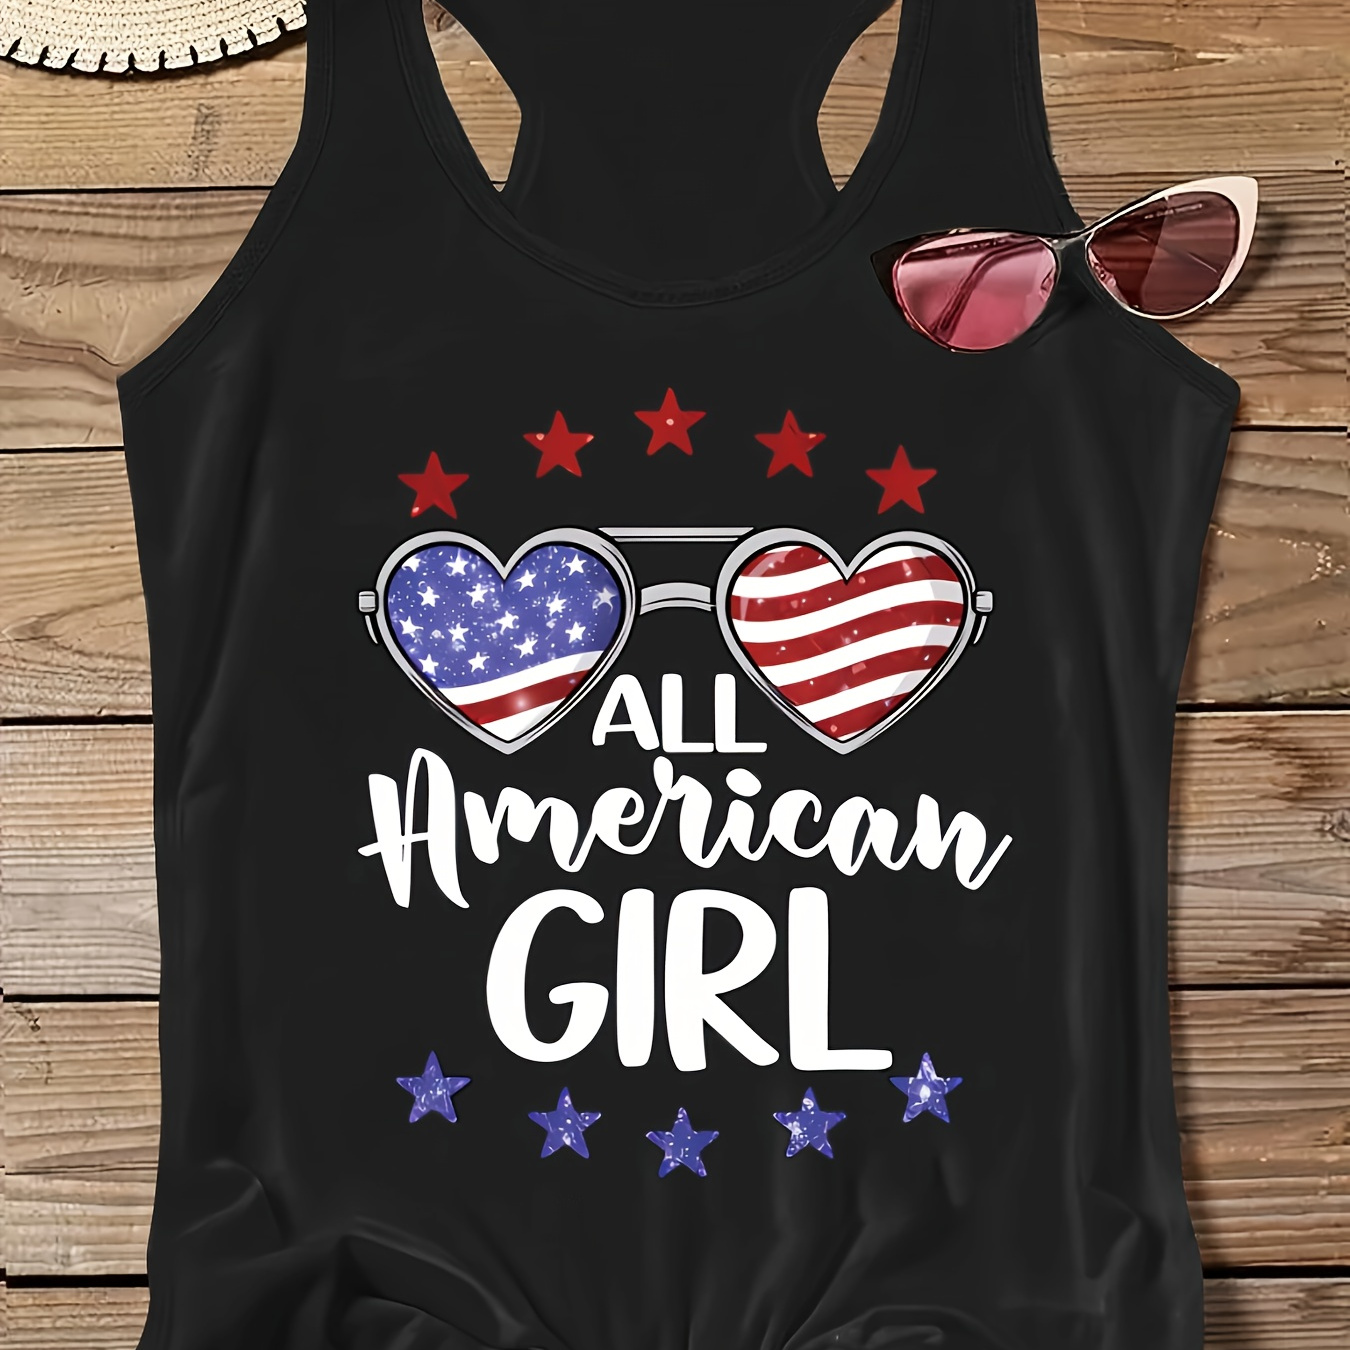 

Plus Size Flag Glasses & Letter Print Tank Top, Casual Crew Neck Sleeveless Top For Summer, Women's Plus Size Clothing